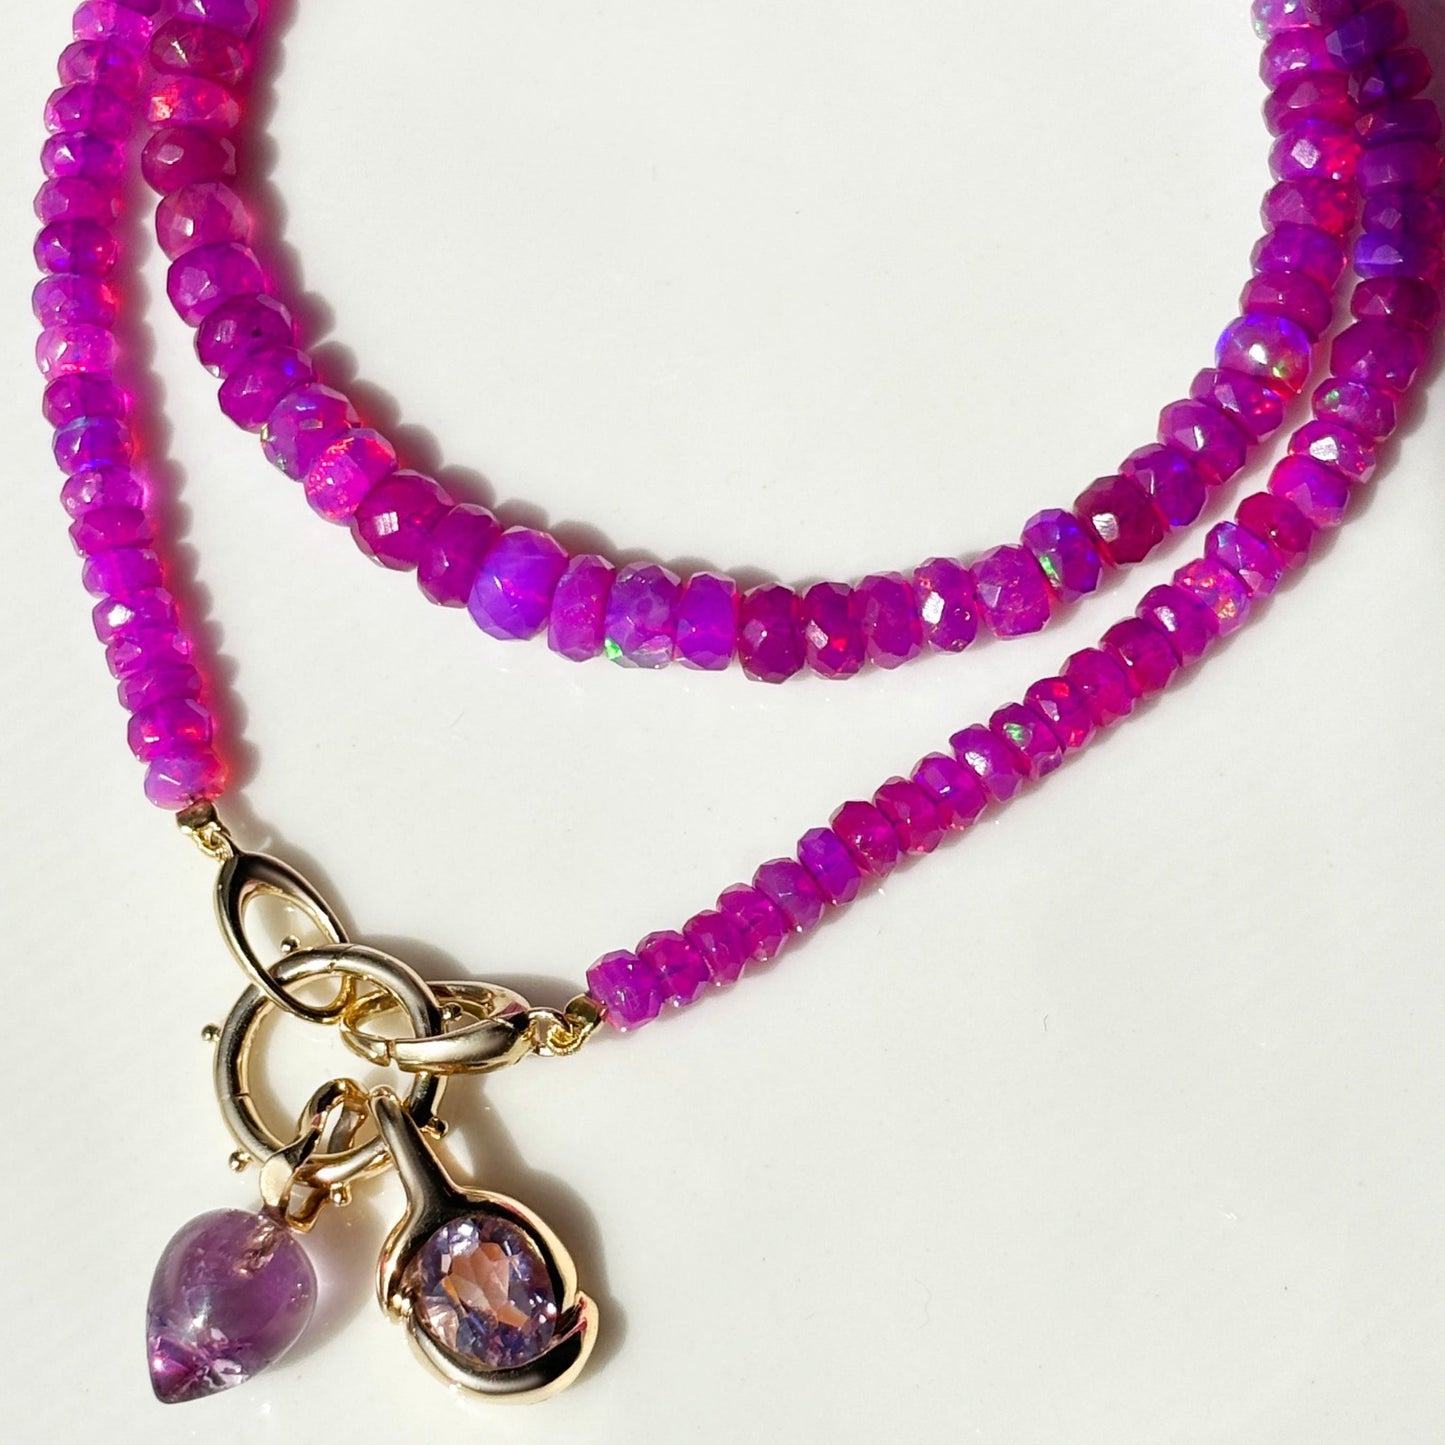 Shimmering beaded necklace made of faceted opals in shades of fuchsia pink on a gold linking ovals clasp. Styled on a neck layered with the beaded round charm lock, amethysts molten knot charm and acorn charm.